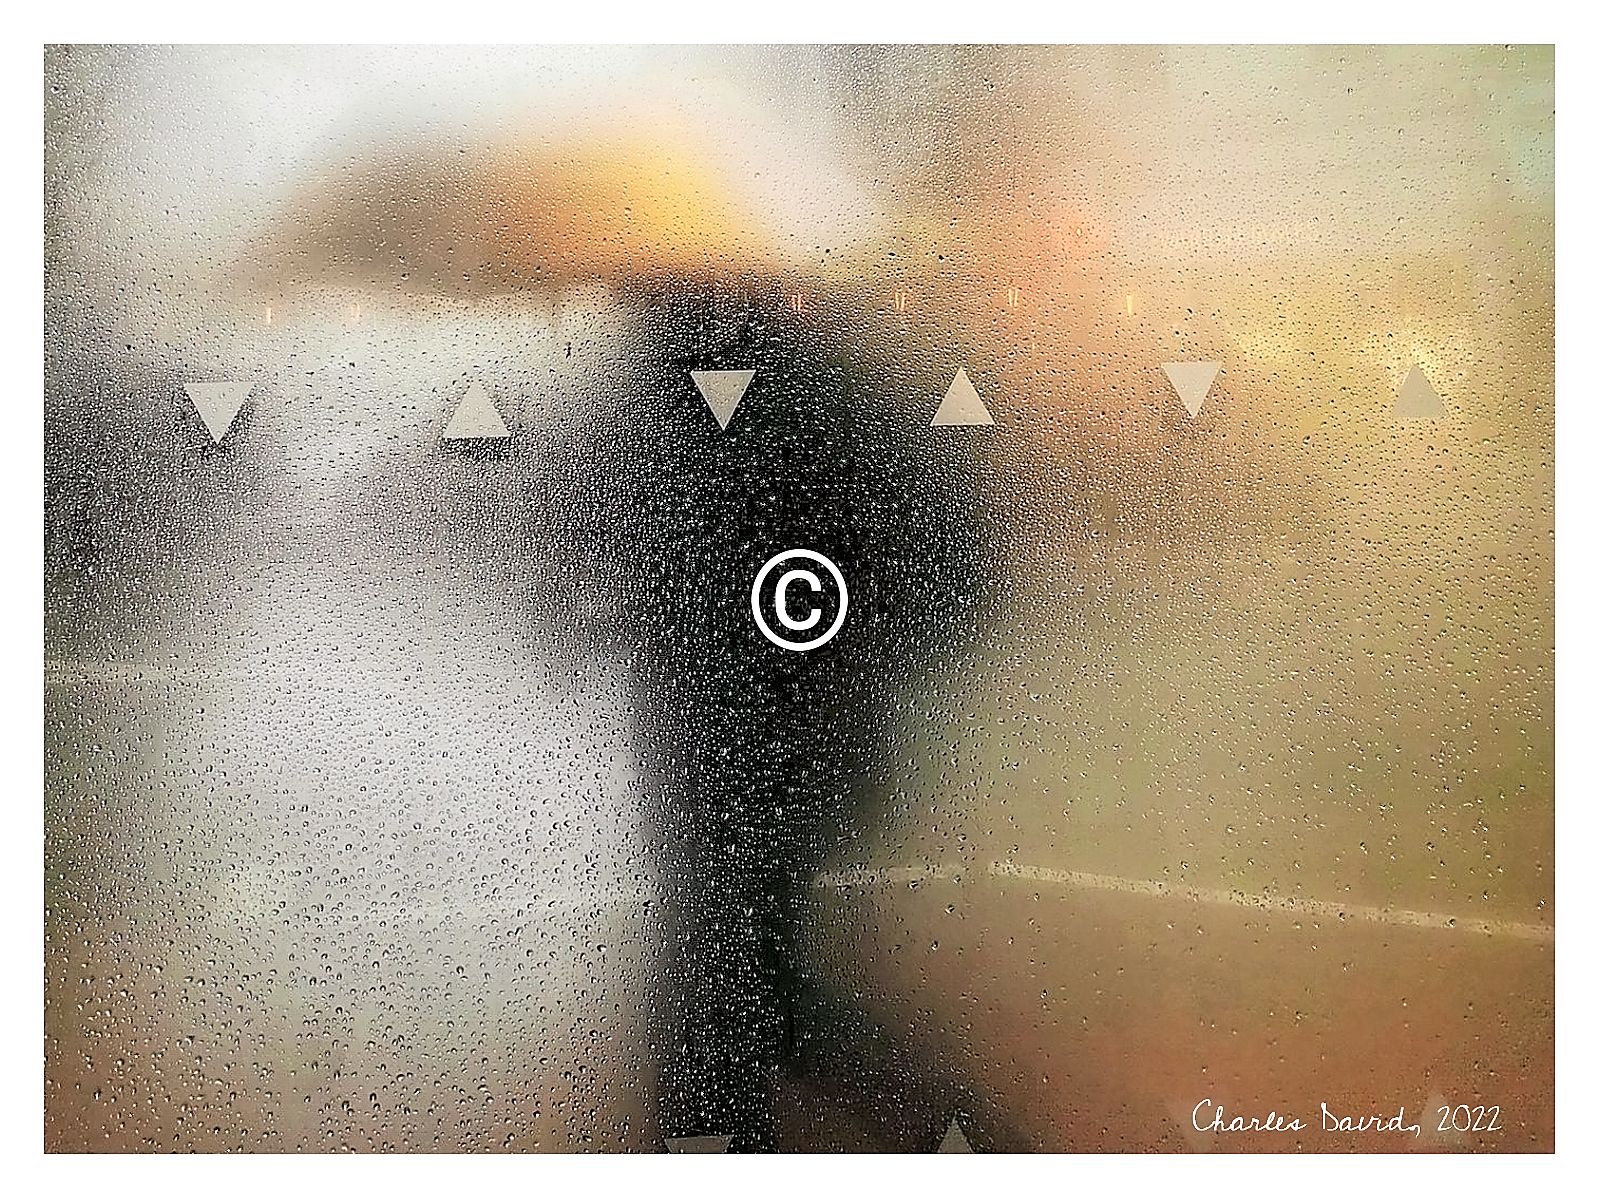 Rainy day cafe, 2022 - Images of Torbay, Dartmoor & The South Hams